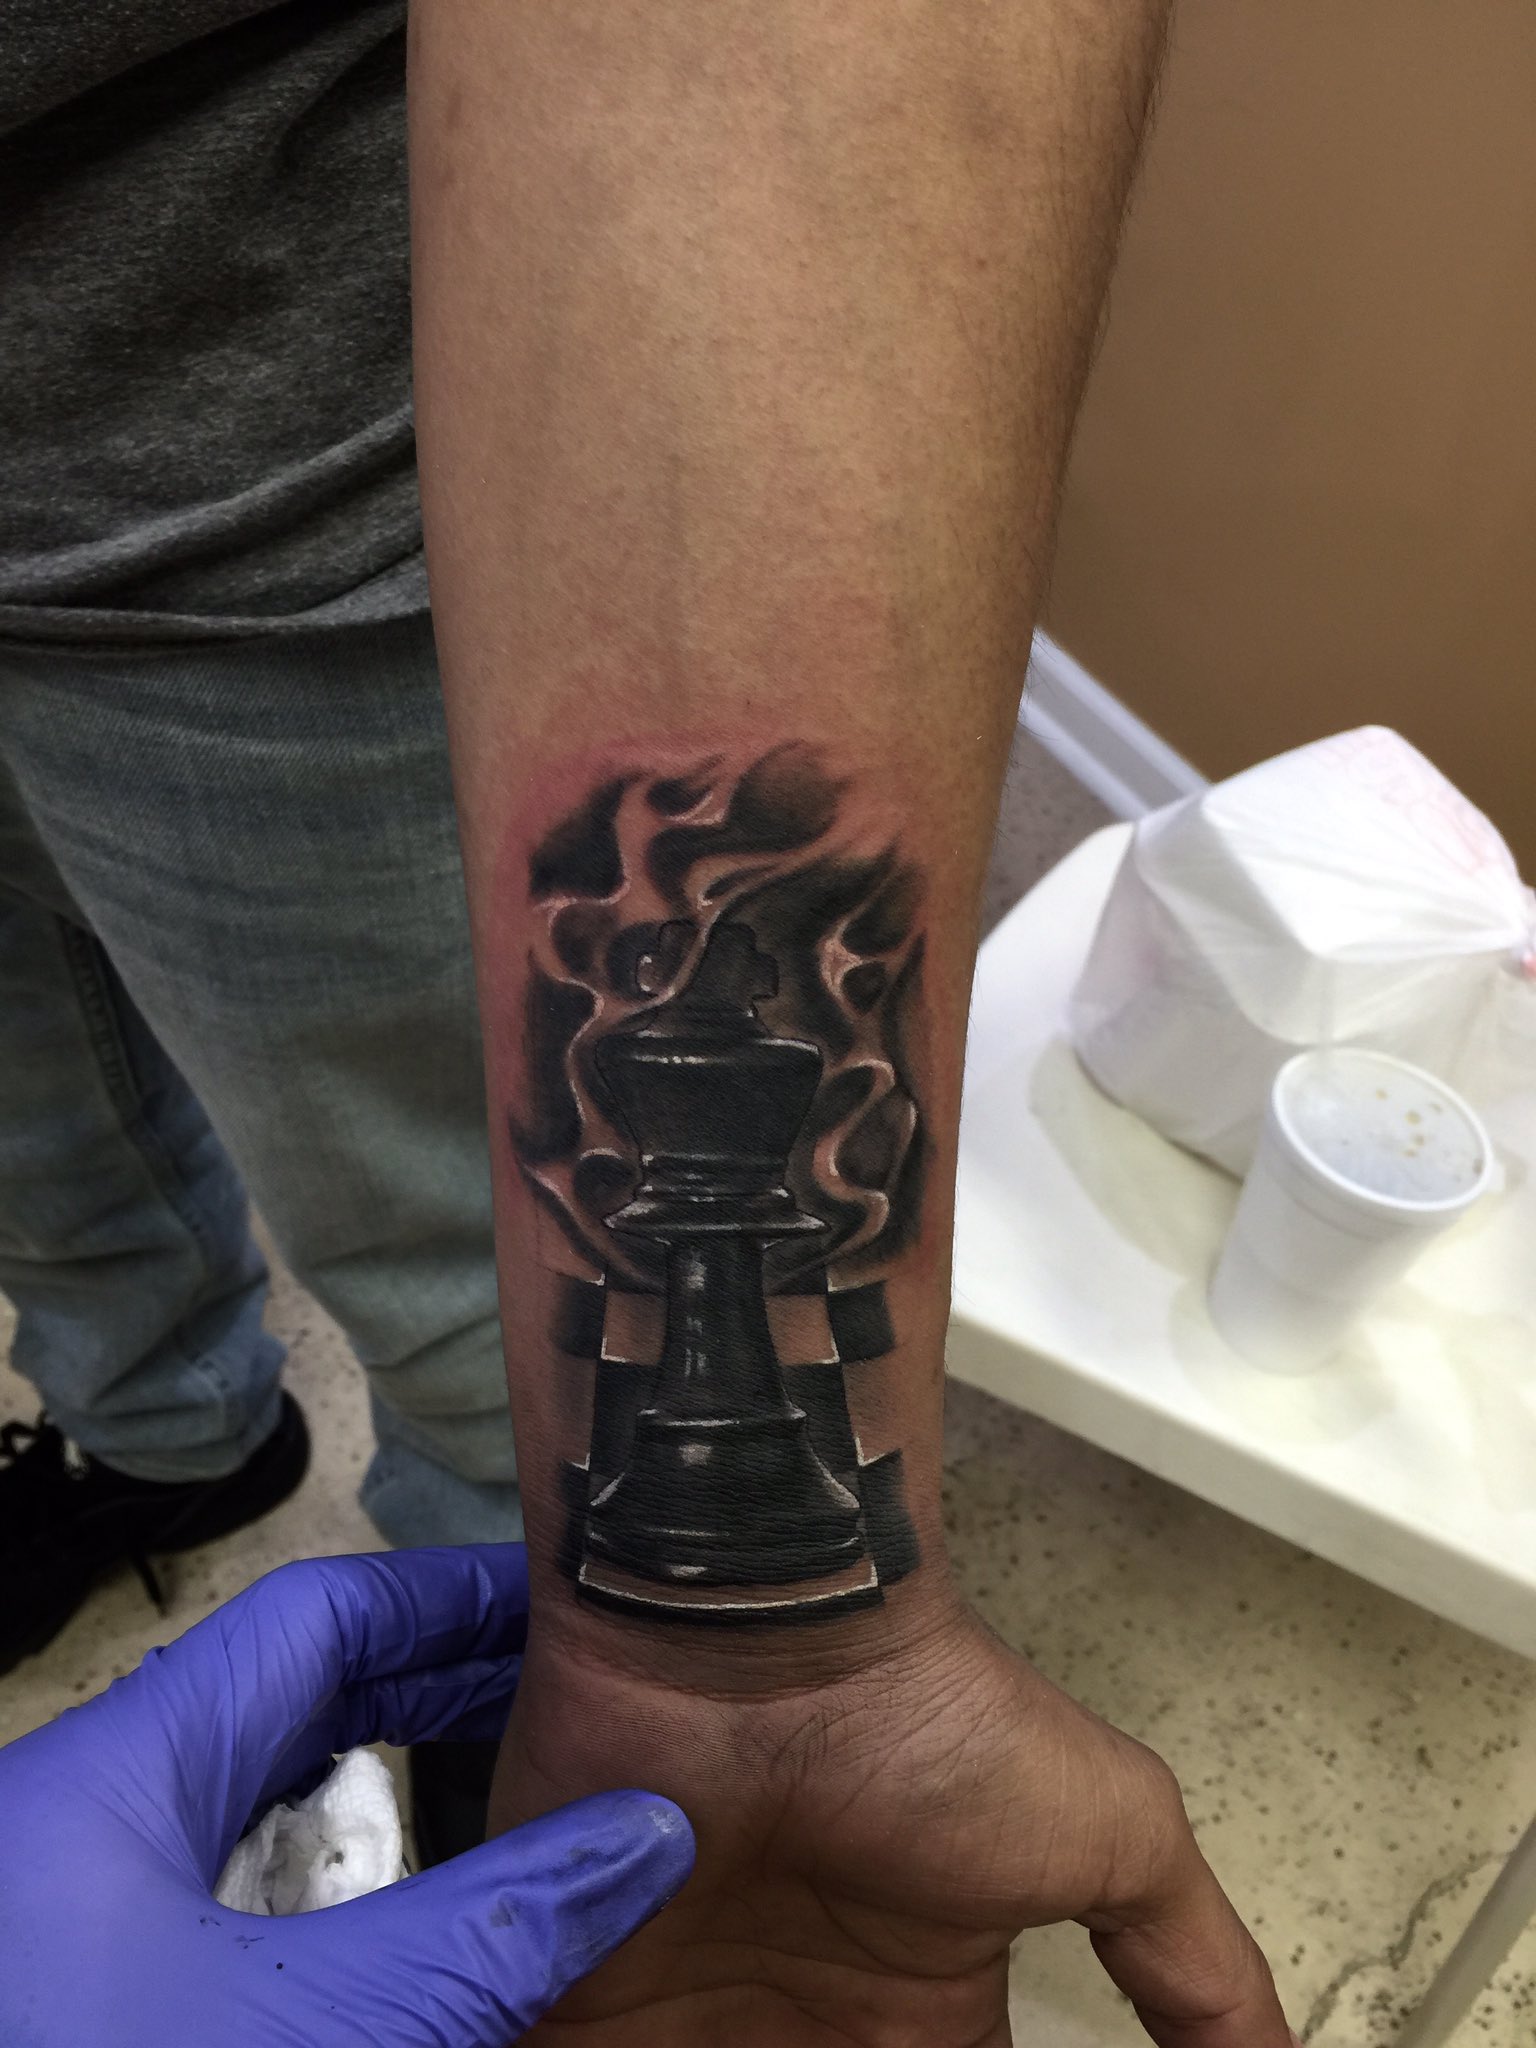 Chess piece tattoo  Tattoo by Chris Henry  Tattoo Boogaloo  Flickr